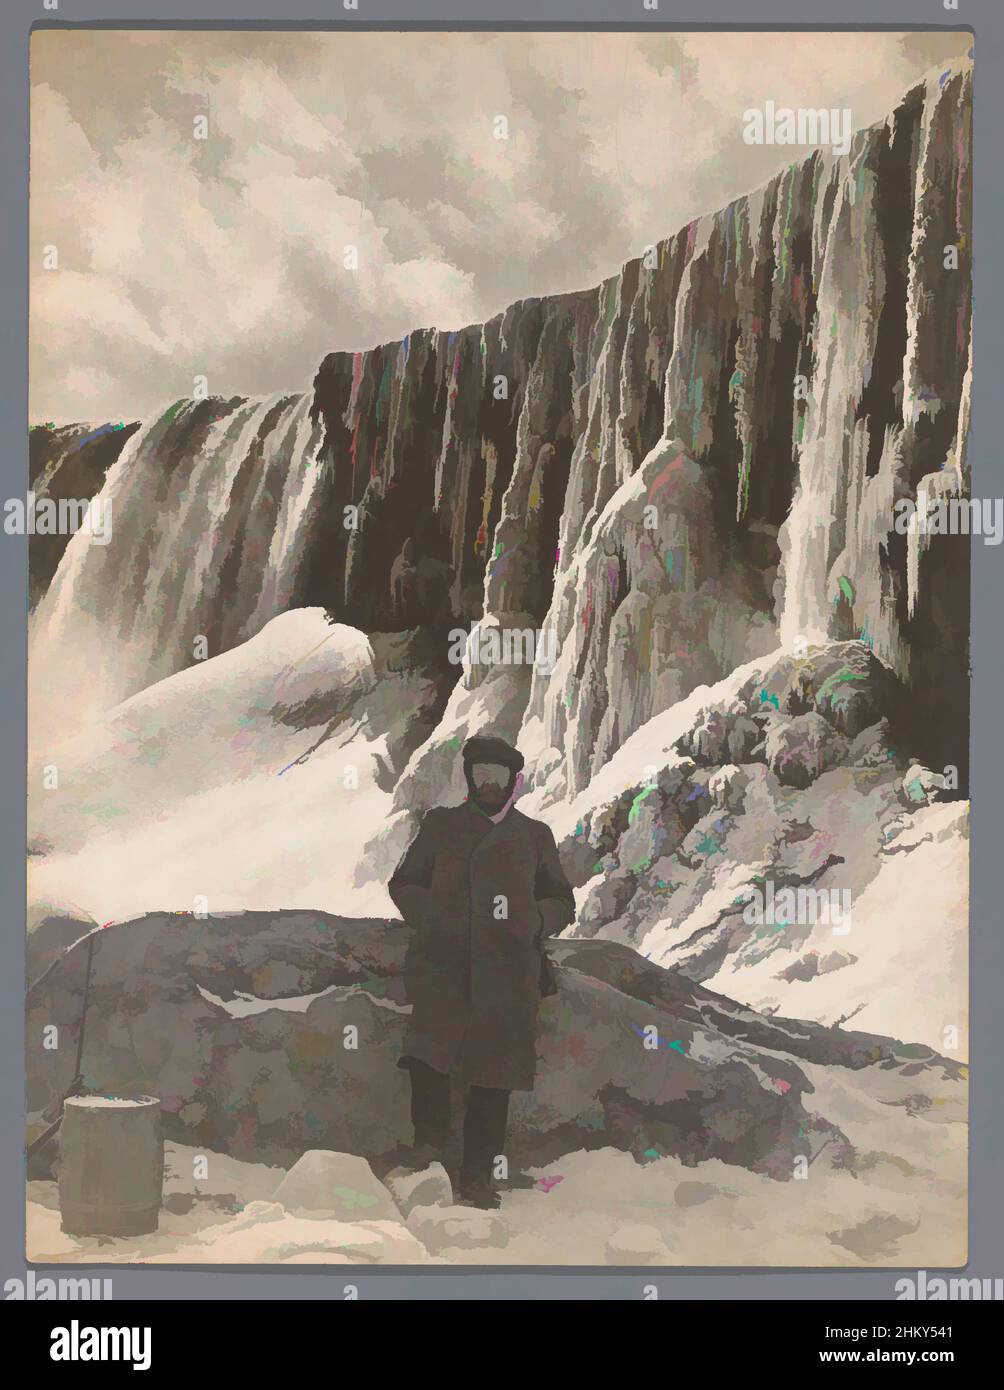 Art inspired by Portrait of M. Graadt van Roggen in front of a frozen waterfall, M. Graadt van Roggen, Netherlands, 1900 - 1920, paper, height 209 mm × width 160 mm, Classic works modernized by Artotop with a splash of modernity. Shapes, color and value, eye-catching visual impact on art. Emotions through freedom of artworks in a contemporary way. A timeless message pursuing a wildly creative new direction. Artists turning to the digital medium and creating the Artotop NFT Stock Photo